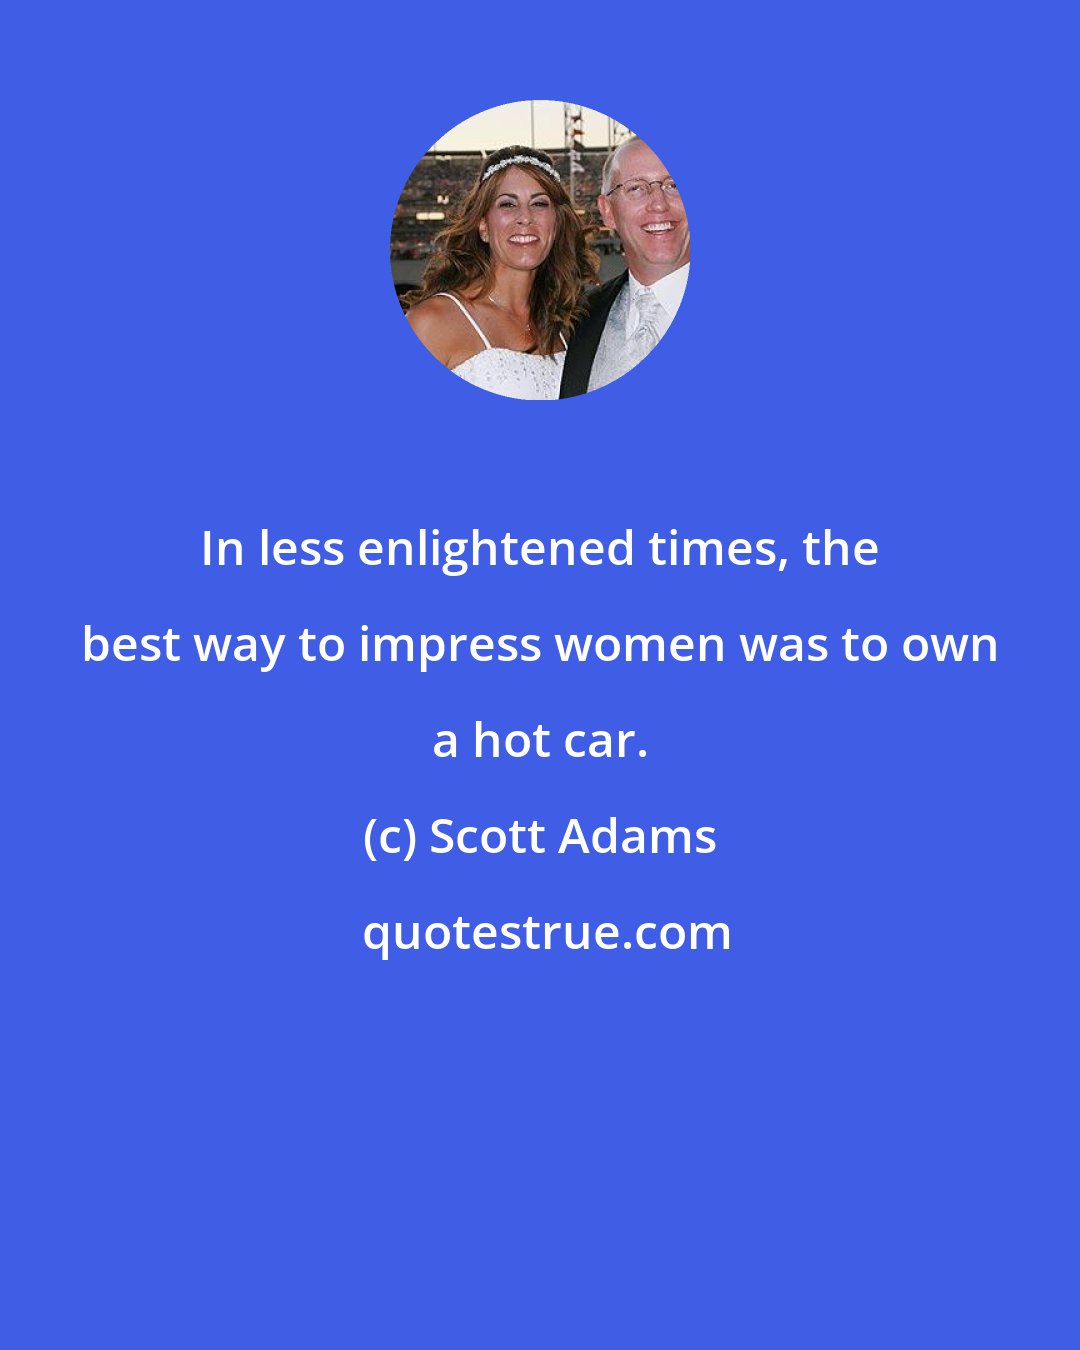 Scott Adams: In less enlightened times, the best way to impress women was to own a hot car.